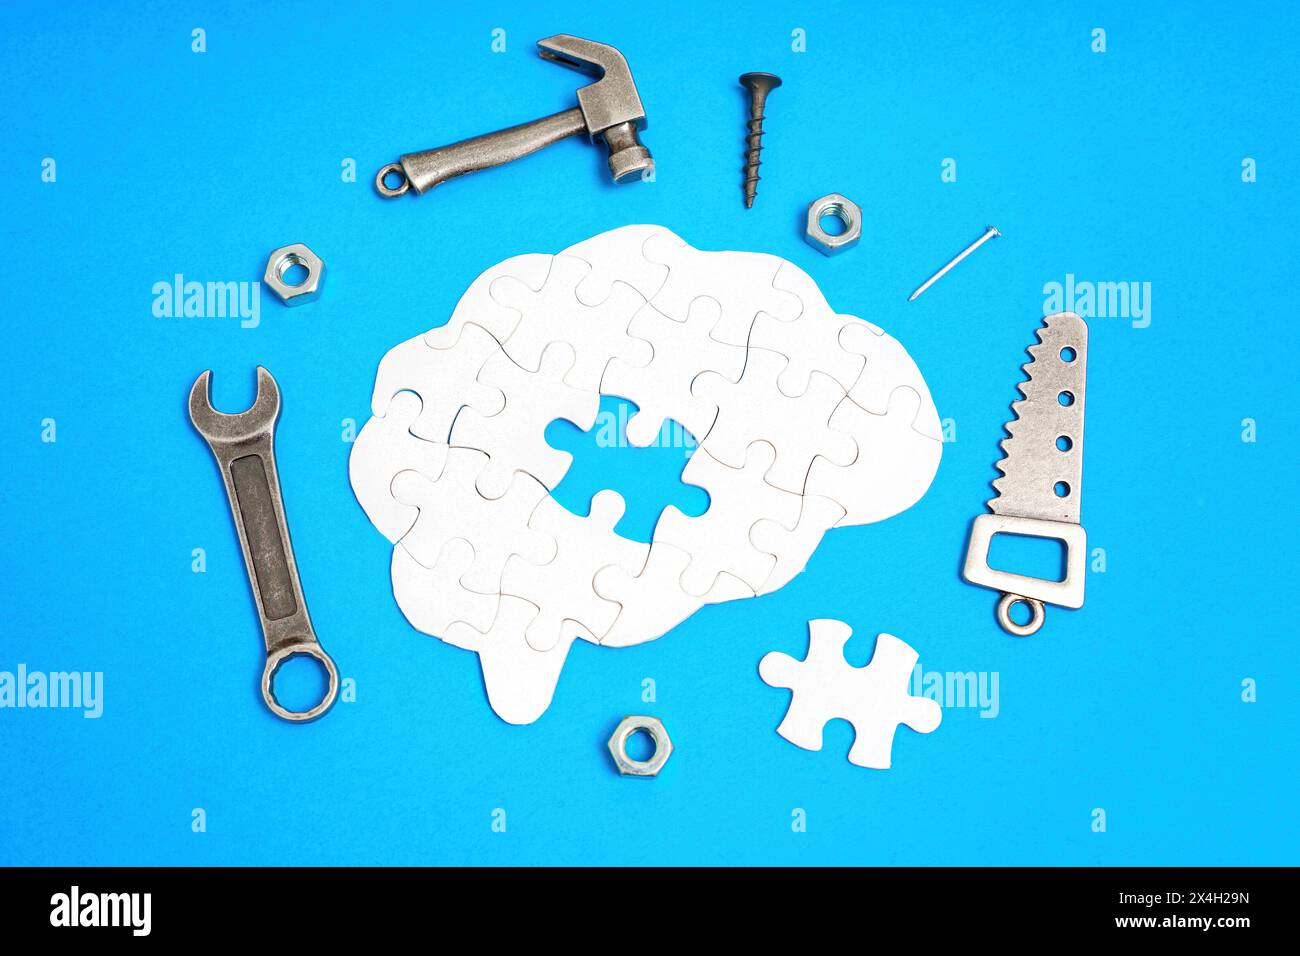 Brain-shaped puzzle with its last missing piece, surrounded by miniature replicas of hand tools including a saw, hammer, wrench, nut, and screw. Probl Stock Photo